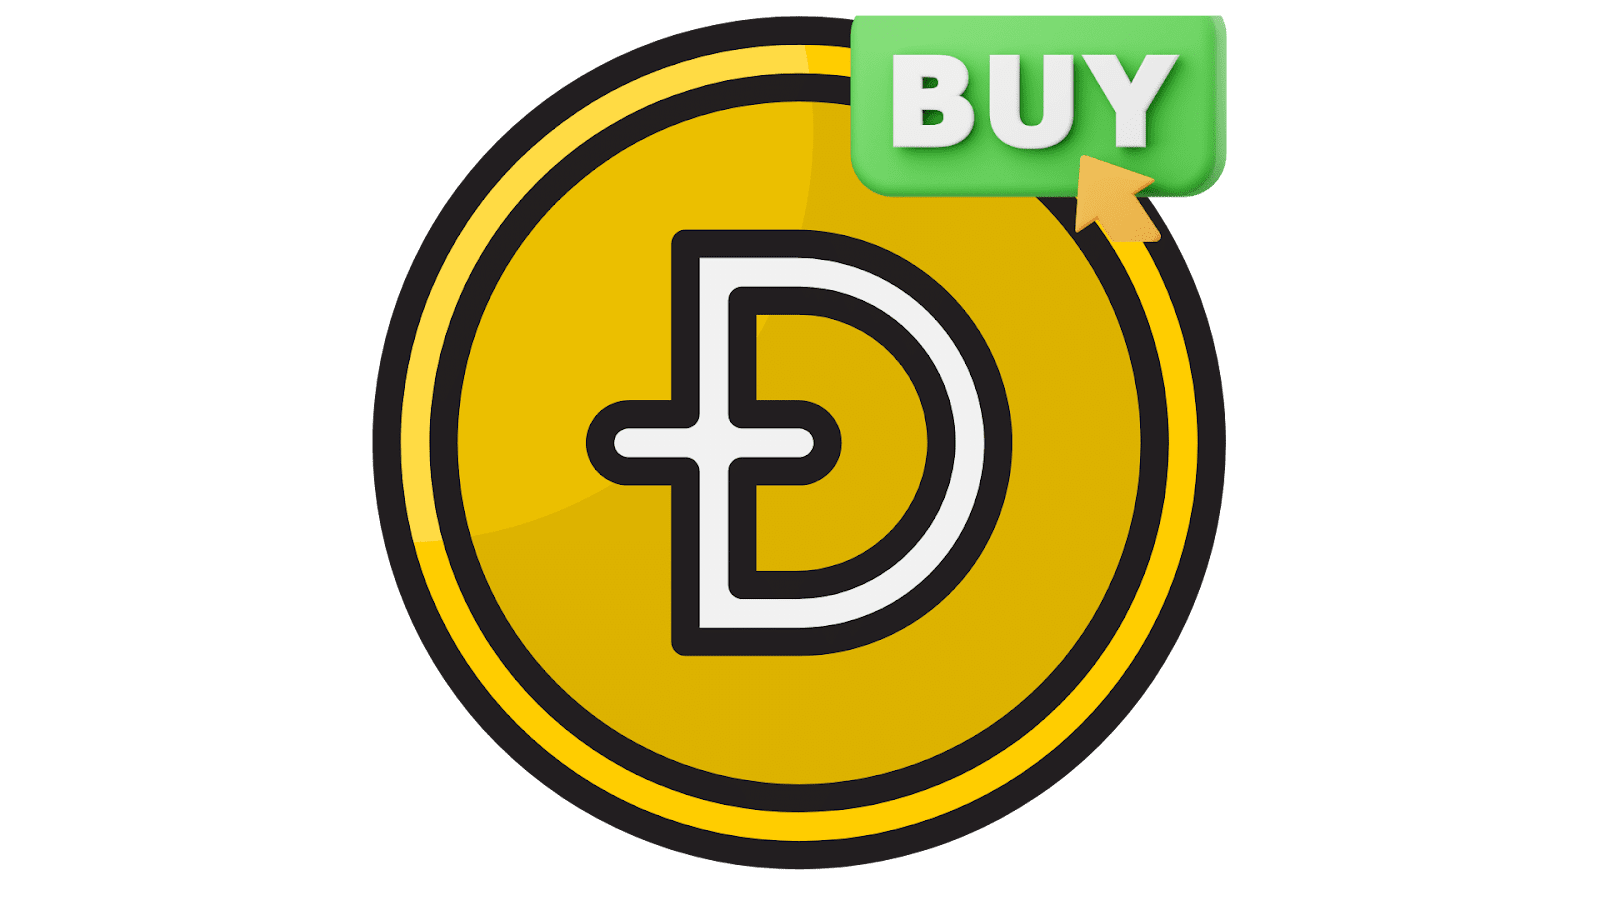 How to Buy Dogecoin